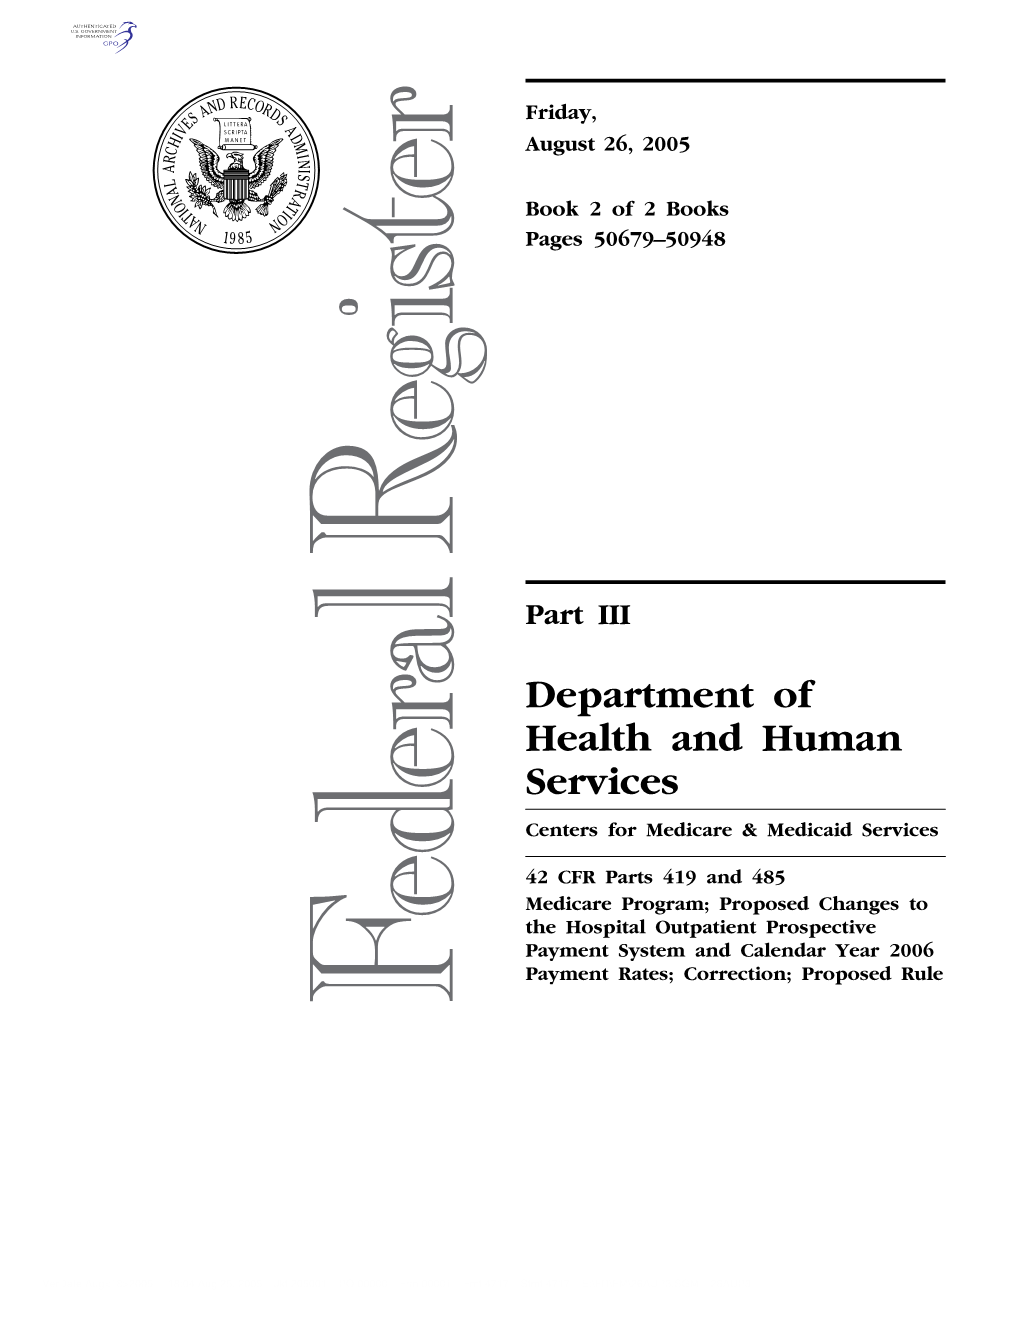 Department of Health and Human Services Centers for Medicare & Medicaid Services